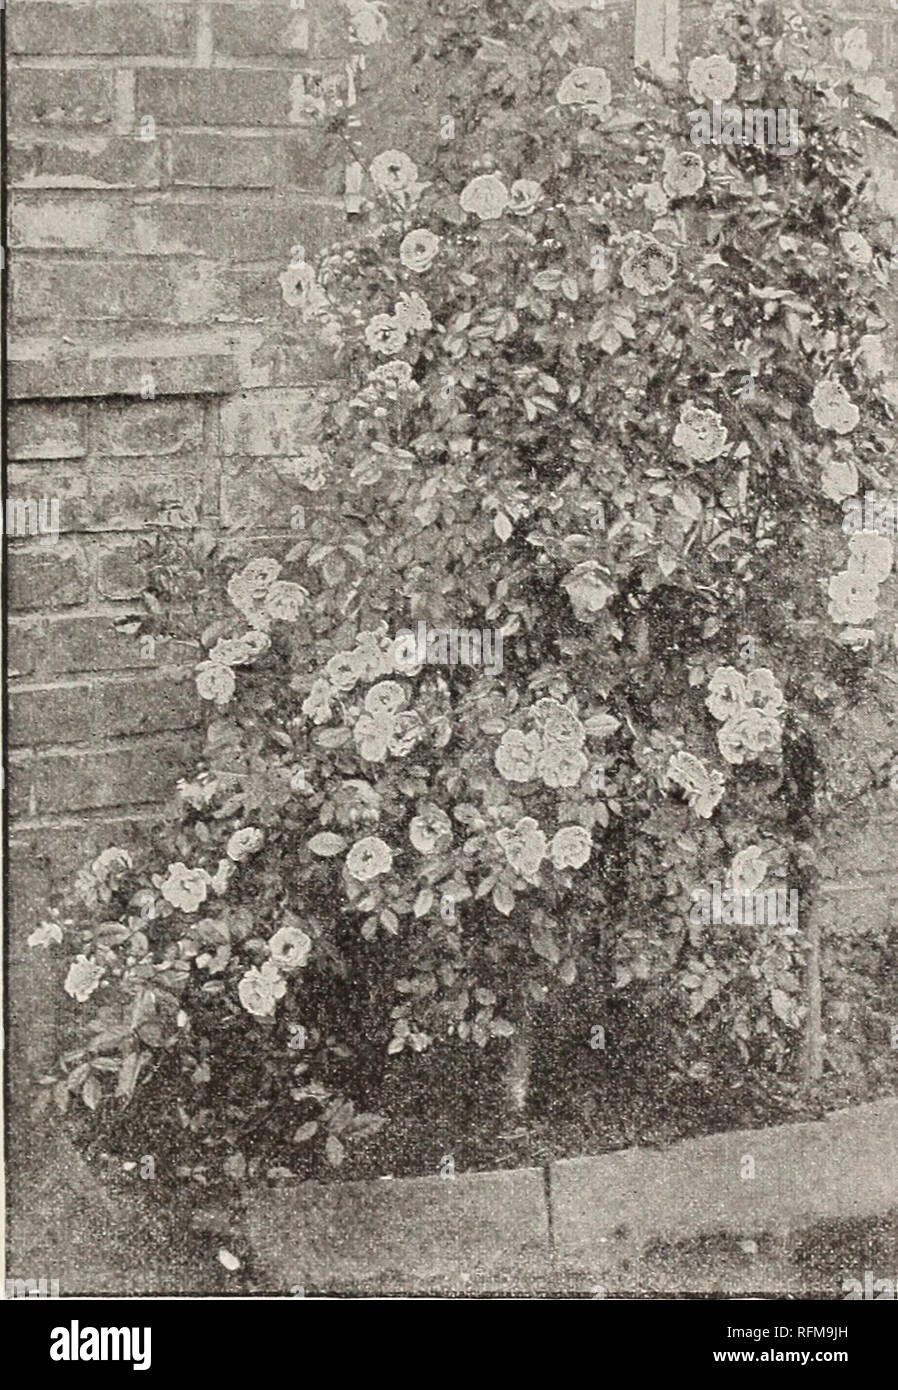 . Descriptive catalogue of ornamental trees, shrubs, vines, evergreens, hardy plants and fruits. Nurseries (Horticulture), Pennsylvania, Catalogs; Trees, Seedlings, Catalogs; Ornamental shrubs, Catalogs; Flowers, Catalogs; Plants, Ornamental, Catalogs; Fruit, Catalogs. YELLOW RAMBLER ROSE. (Aglaia.) The new rose, Yellow Rambler, ( Aglaxa.,) is one to which considerable interest attaches, as a yellow flowered climbing rose is what has been long desired in this country. It comes, to us so well recommended from the Old World, that no doubt exists as to its great merit. It is a climbing rose, bear Stock Photo